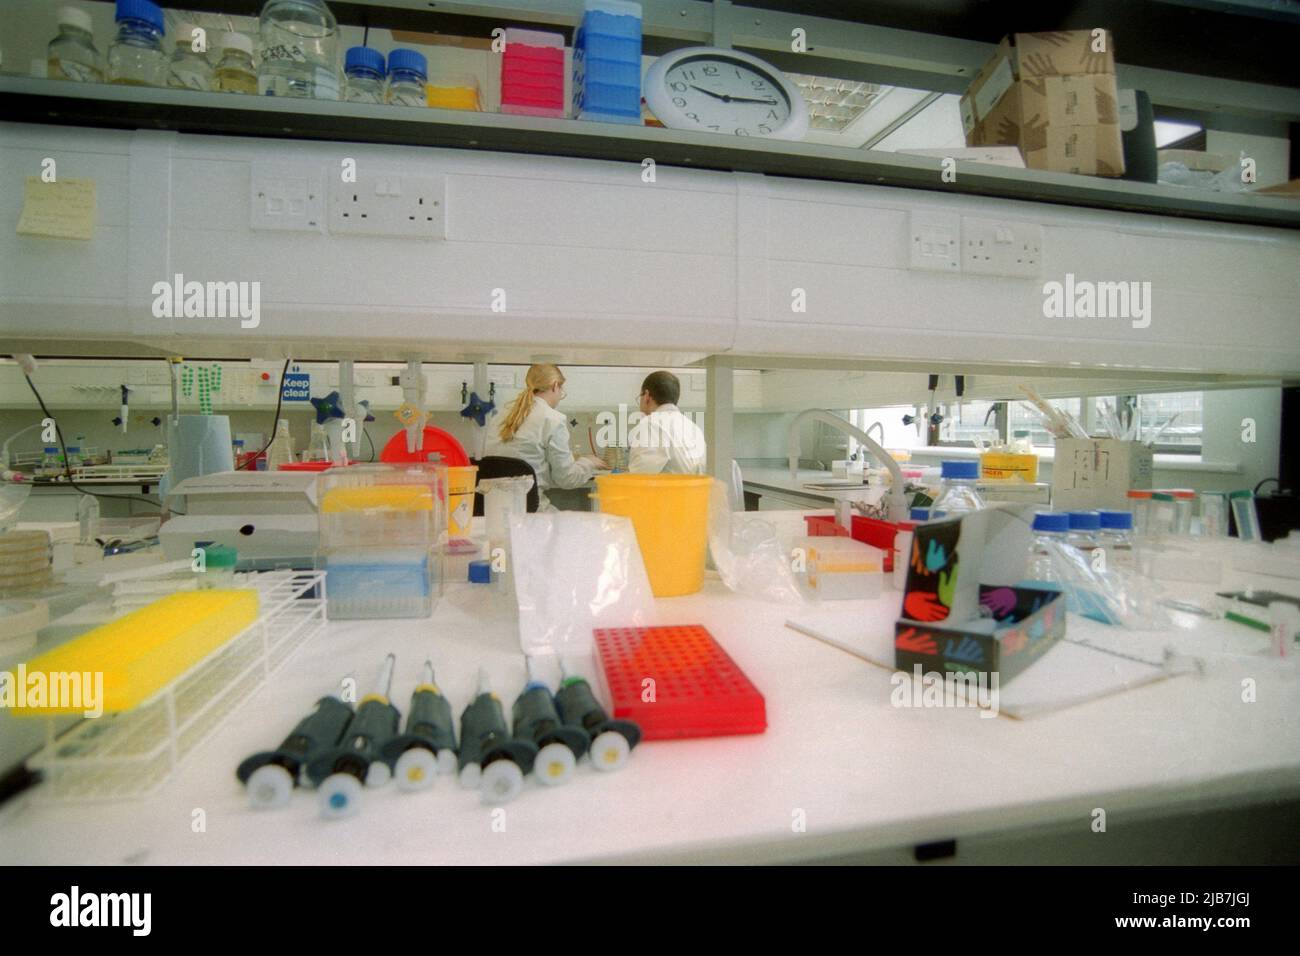 Scientists work in a hospital clinical laboratory Stock Photo